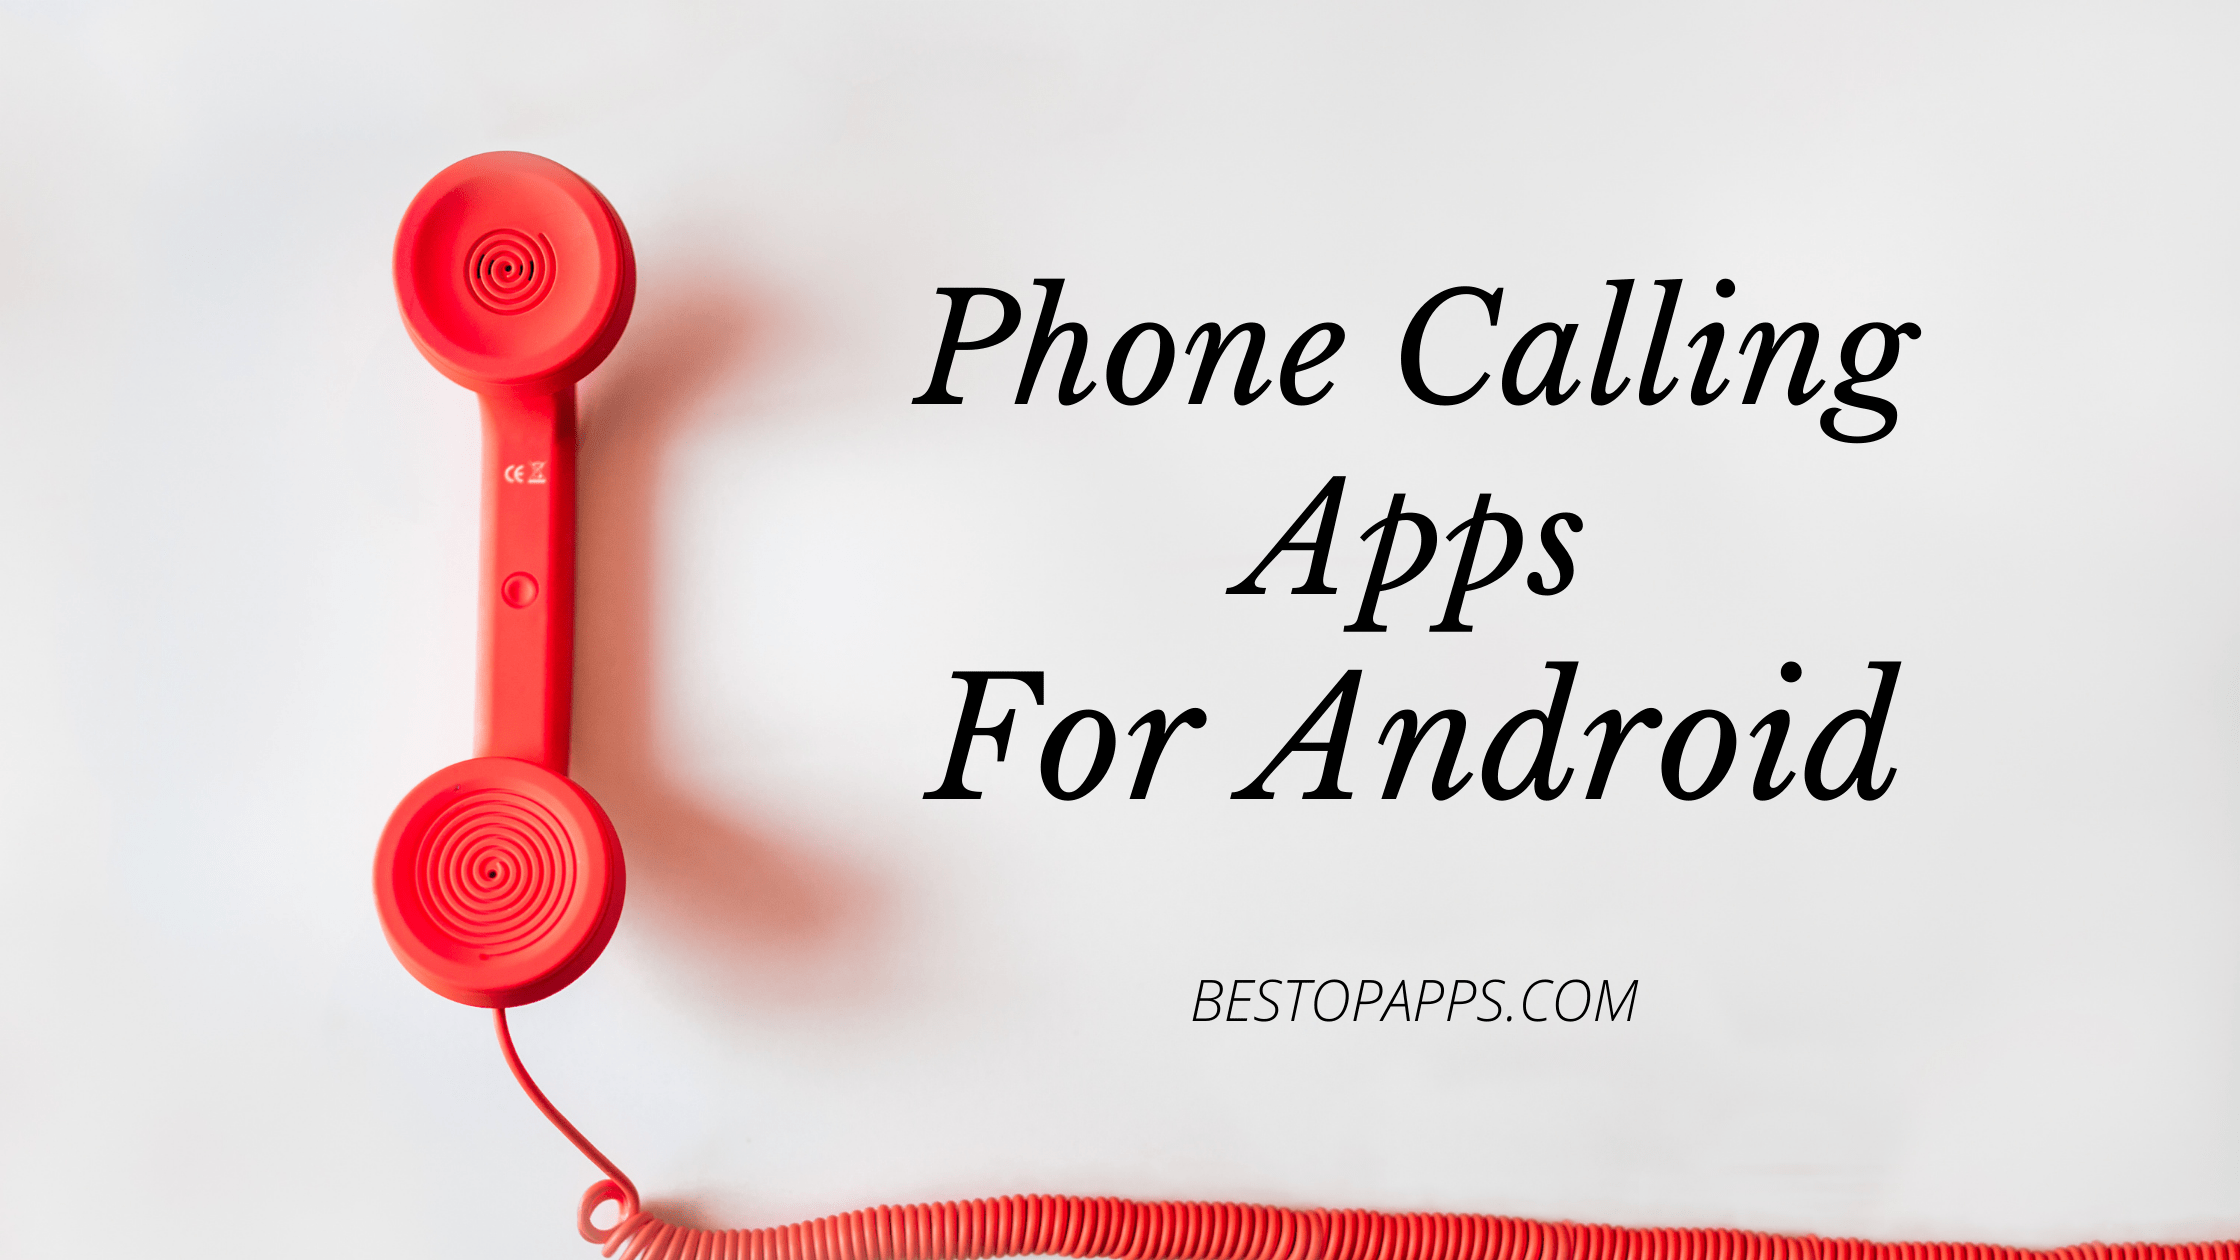 Phone Calling Apps For Android